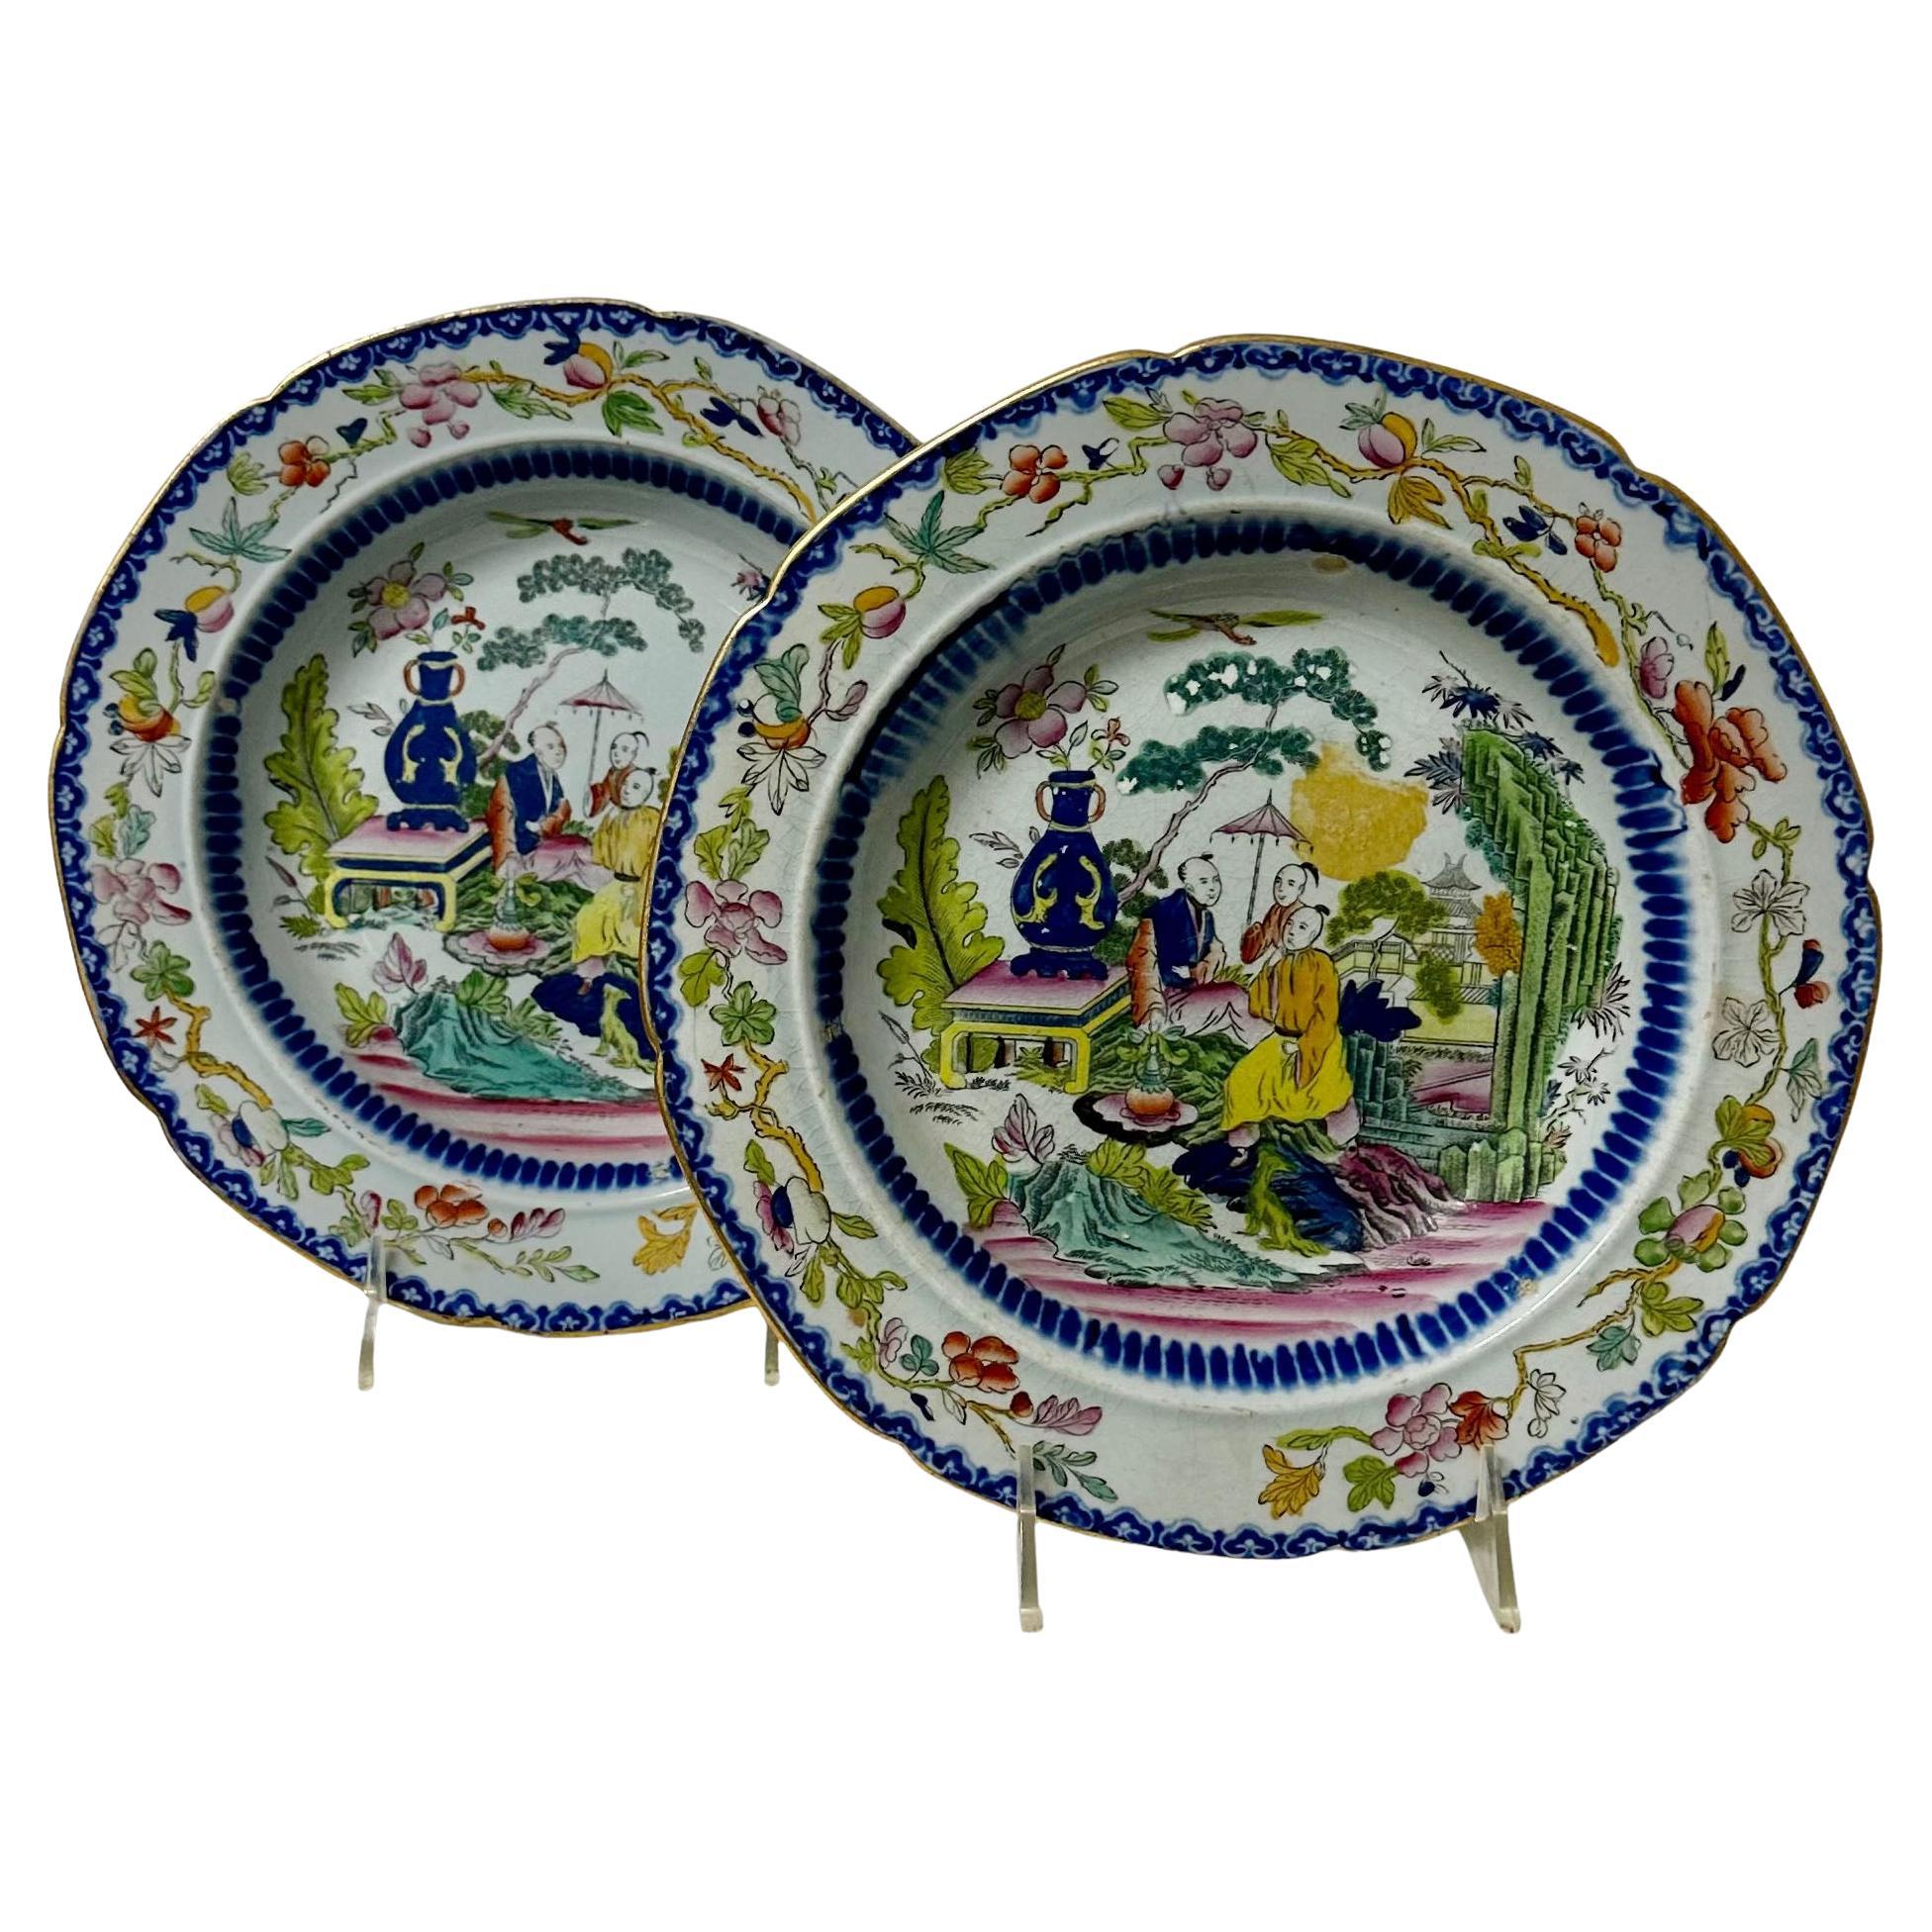 Masons Ironstone Plates - A Pair For Sale